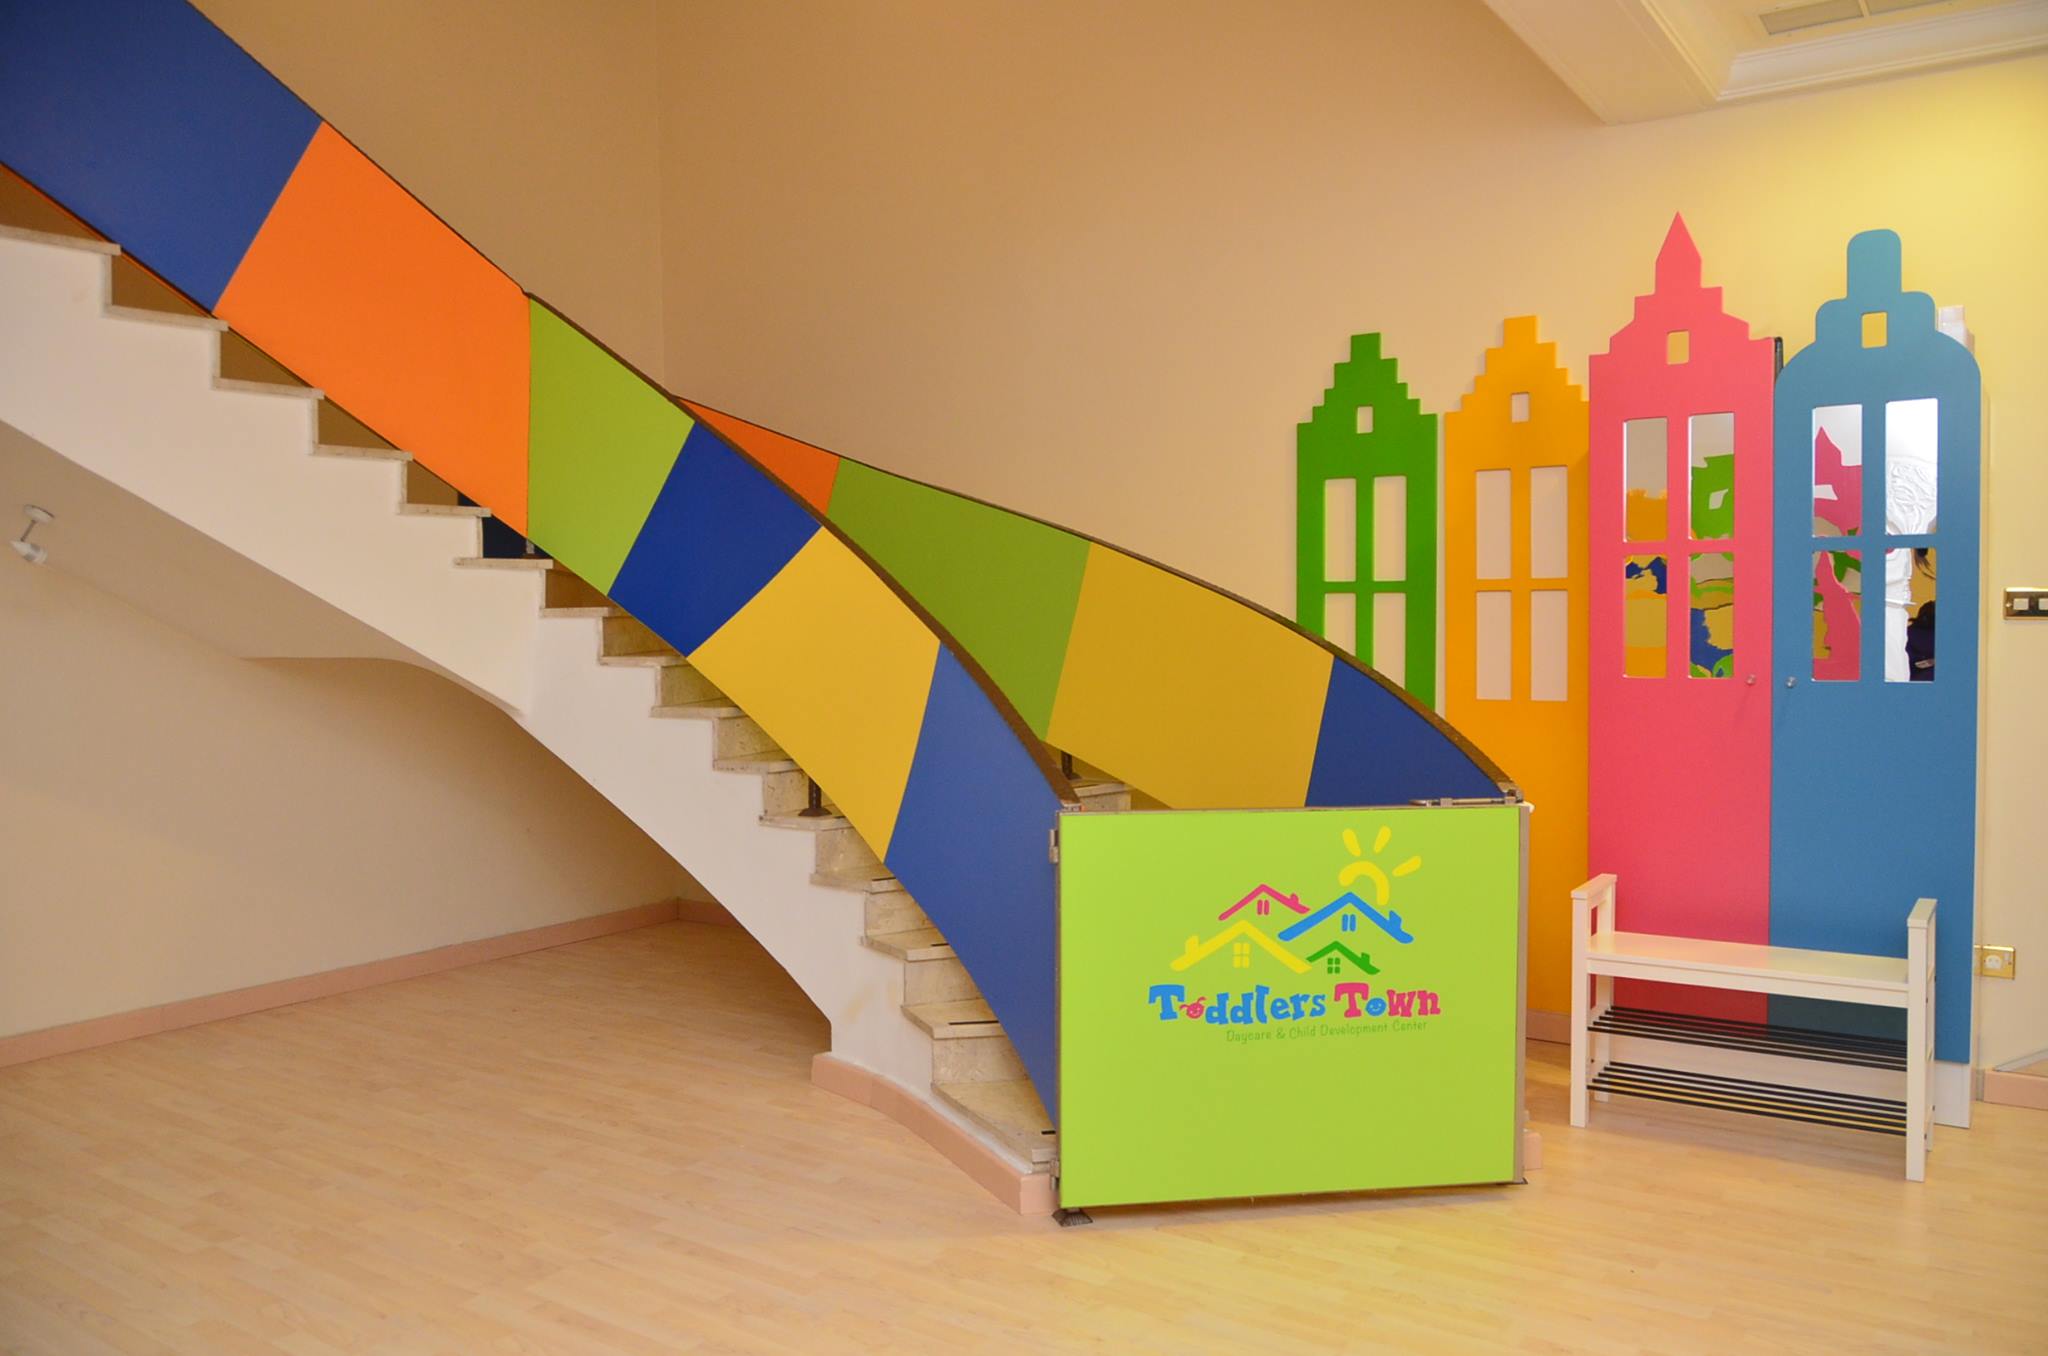 Toddlers Town Daycare & Child development Centre